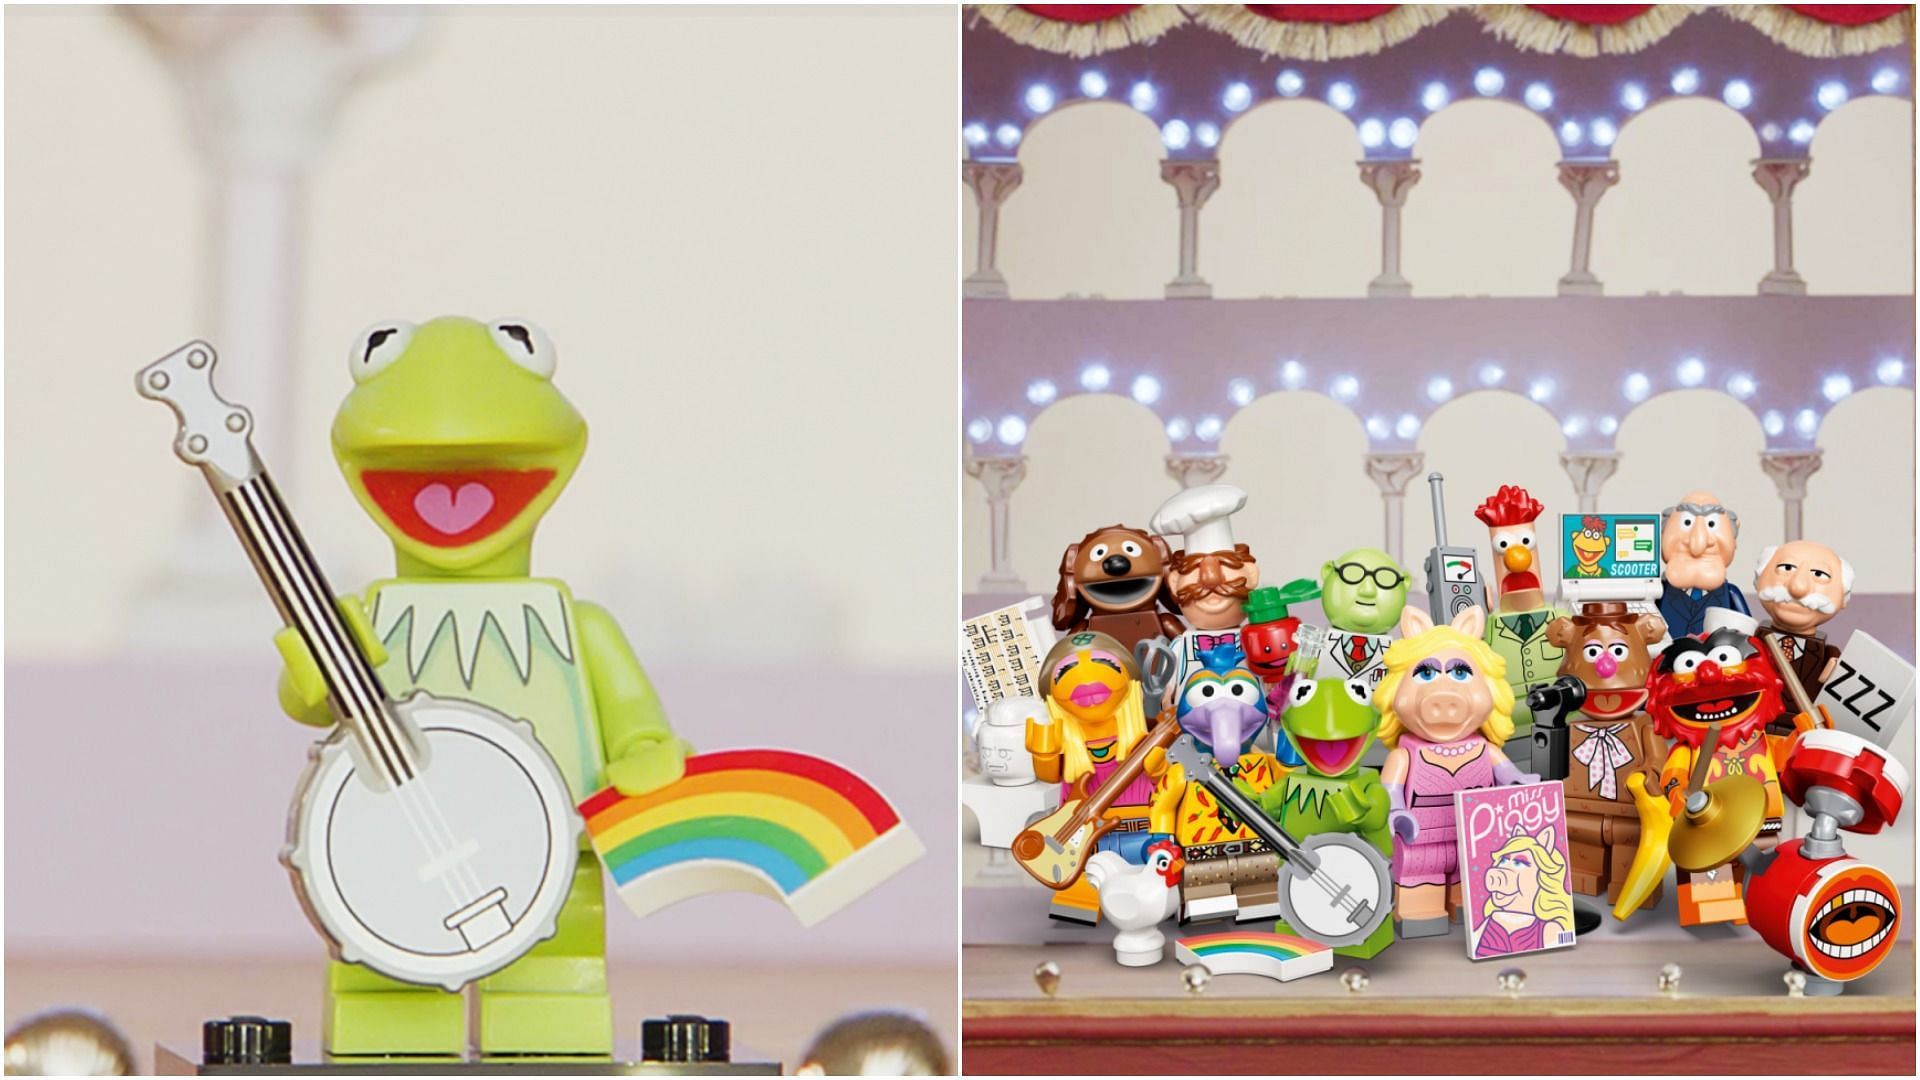 Lego launches a Muppet collection (Image via The Lego Group)